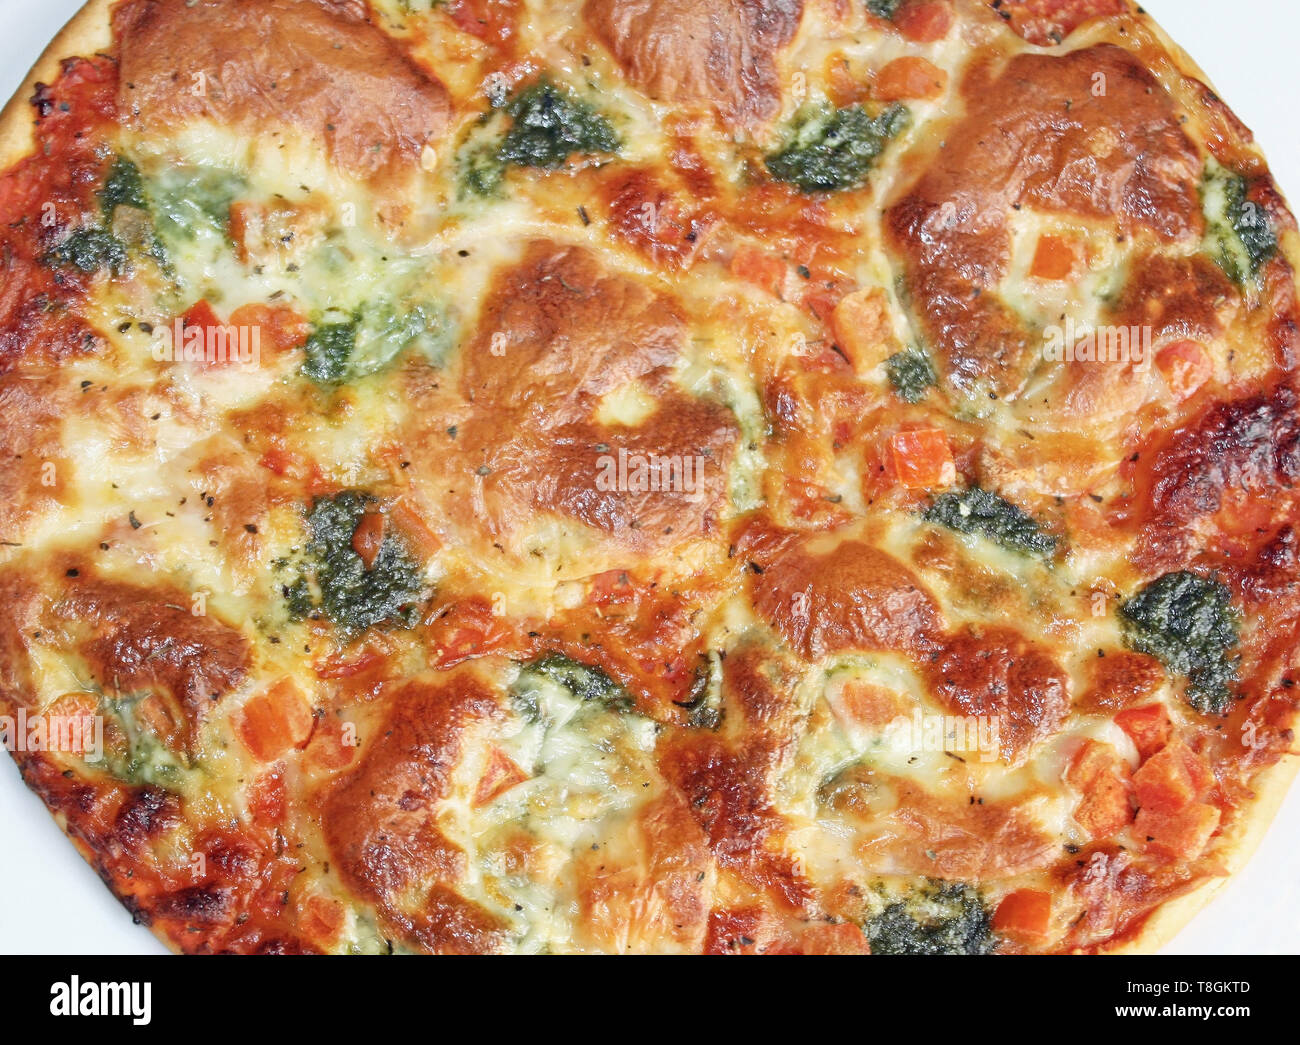 Cheesy pizza baked to a golden brown with spinach and diced tomatoes Stock Photo